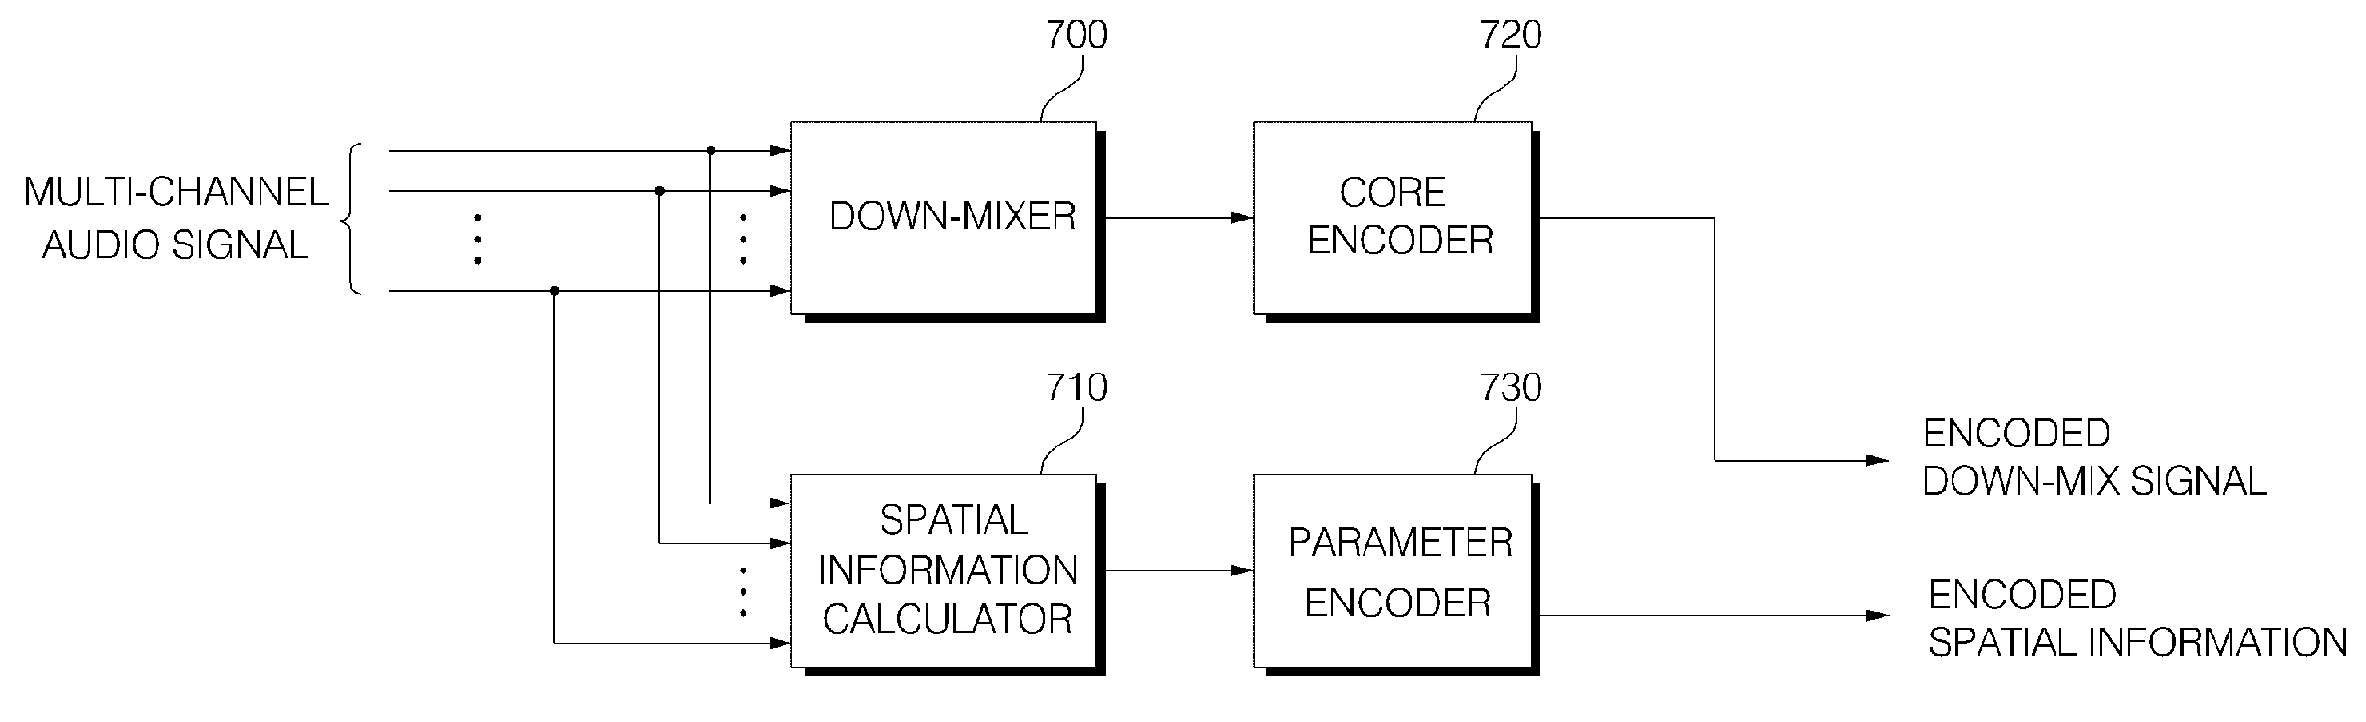 Method and Apparatus for Encoding/Decoding